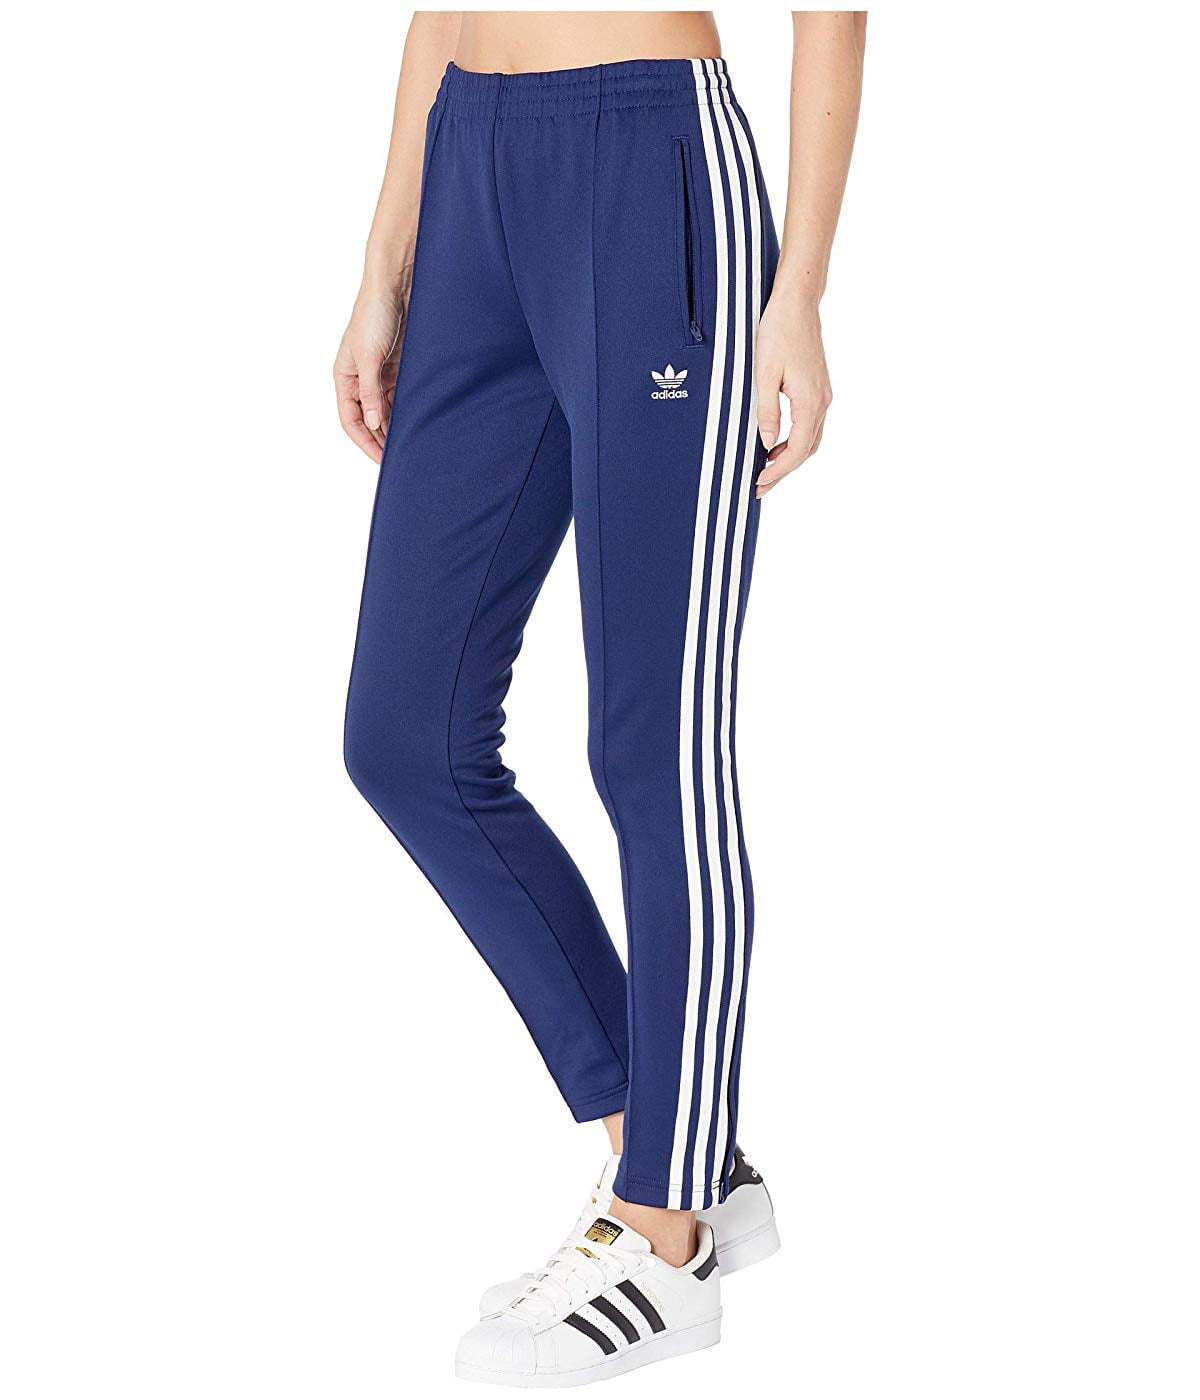 Buy > navy blue adidas joggers womens > in stock